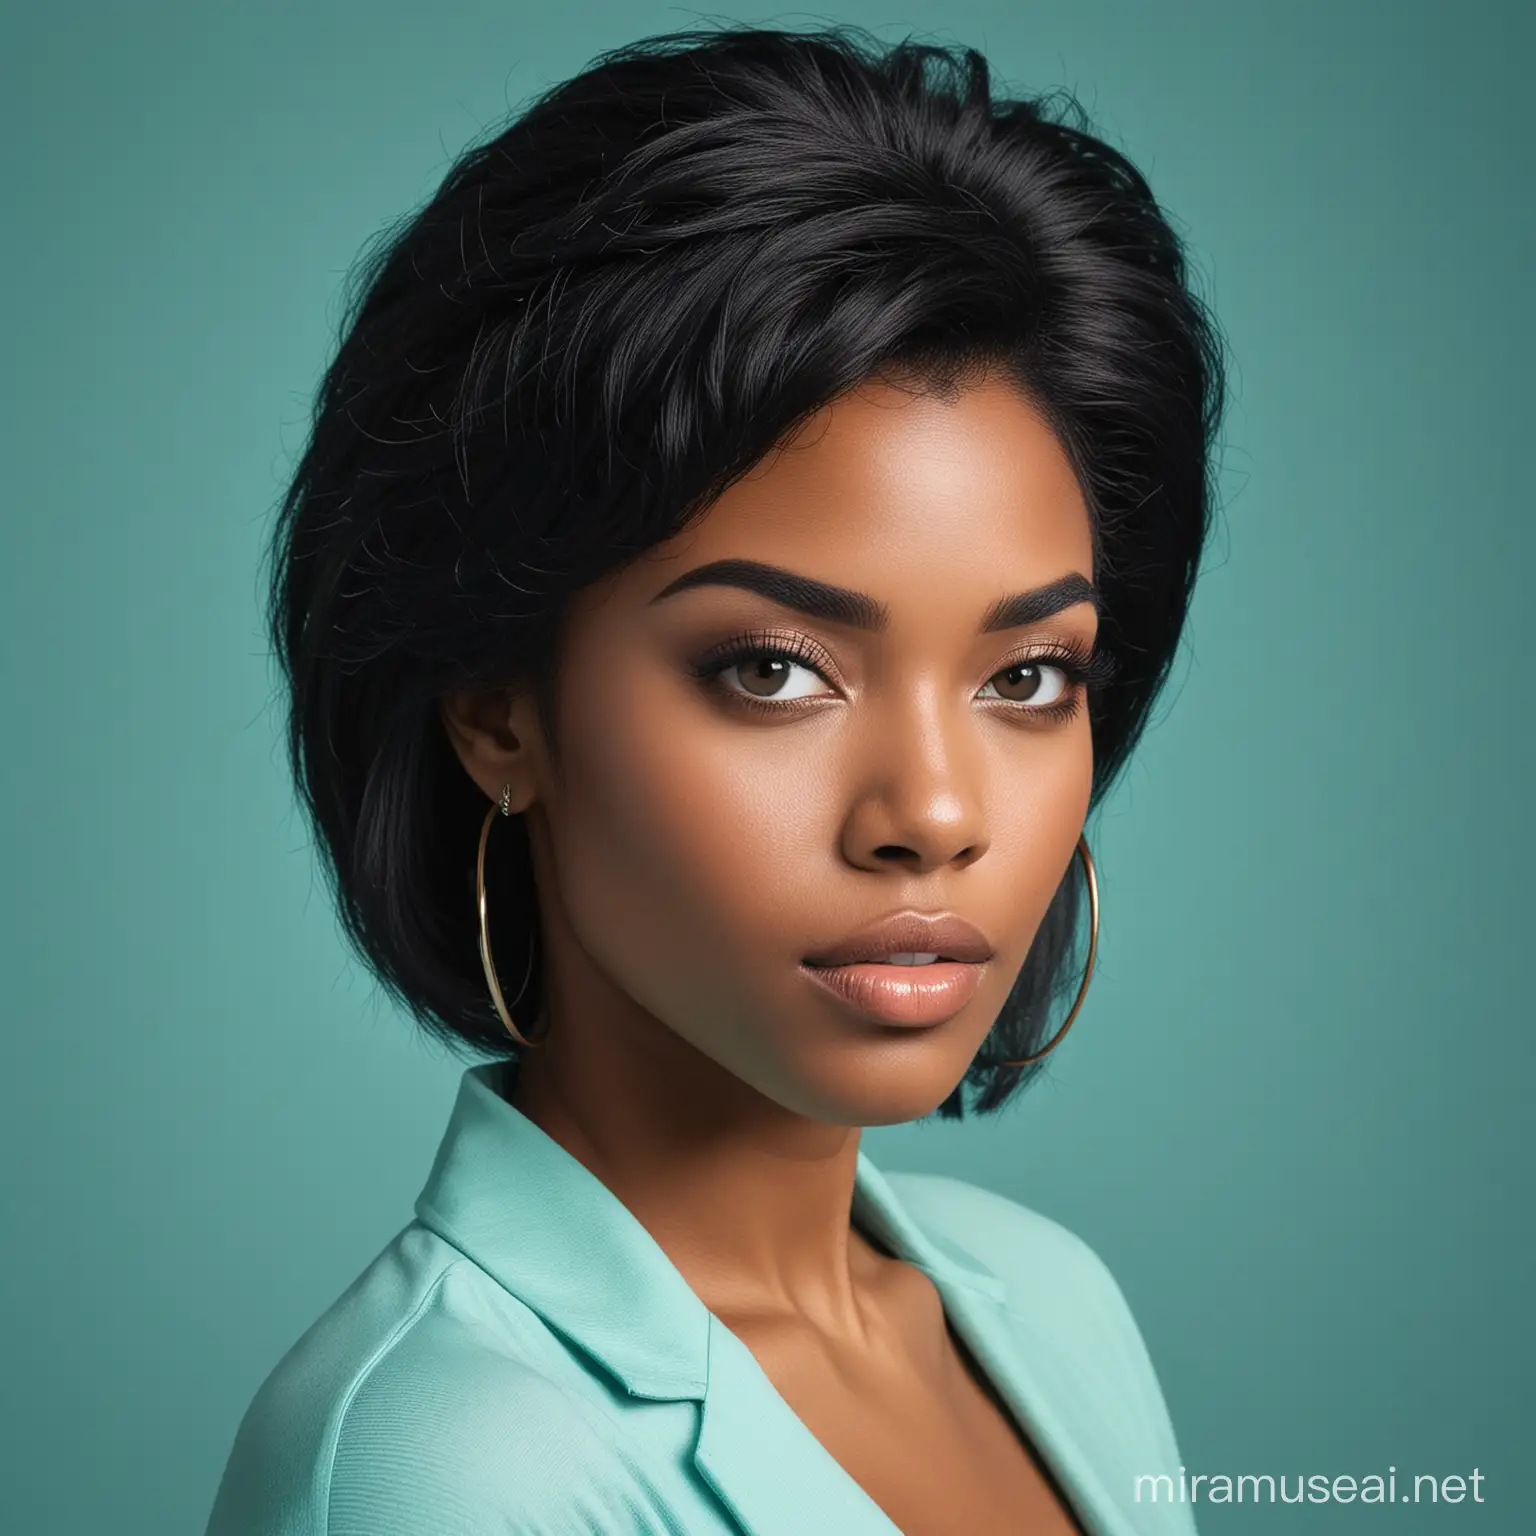 Elegant Black Women with Straight Hair on Teal Background